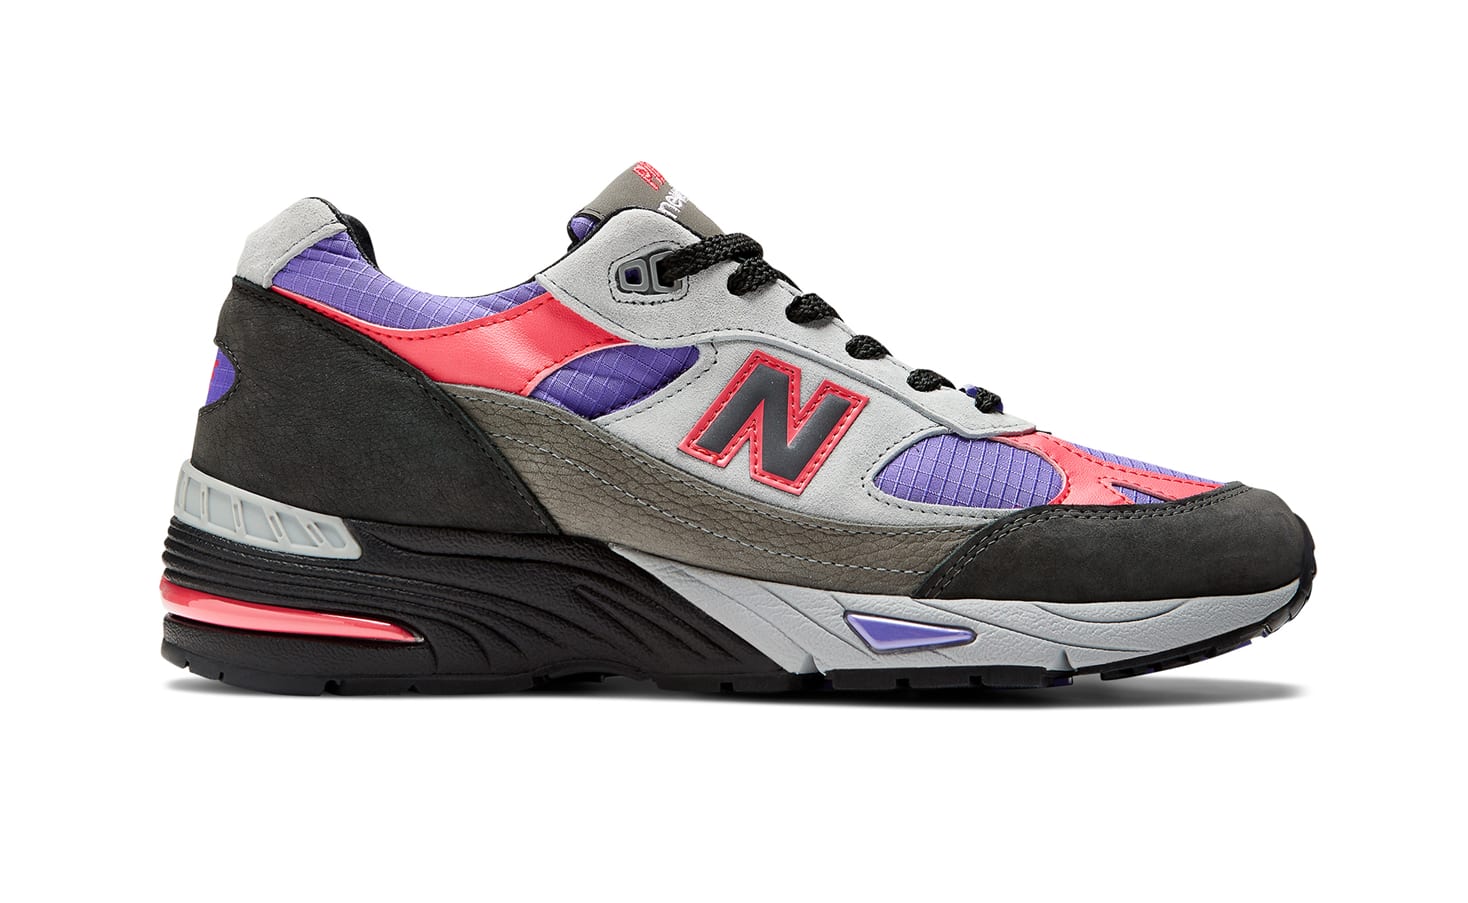 Here's How to Buy the Palace x New Balance 991 Collab | Complex